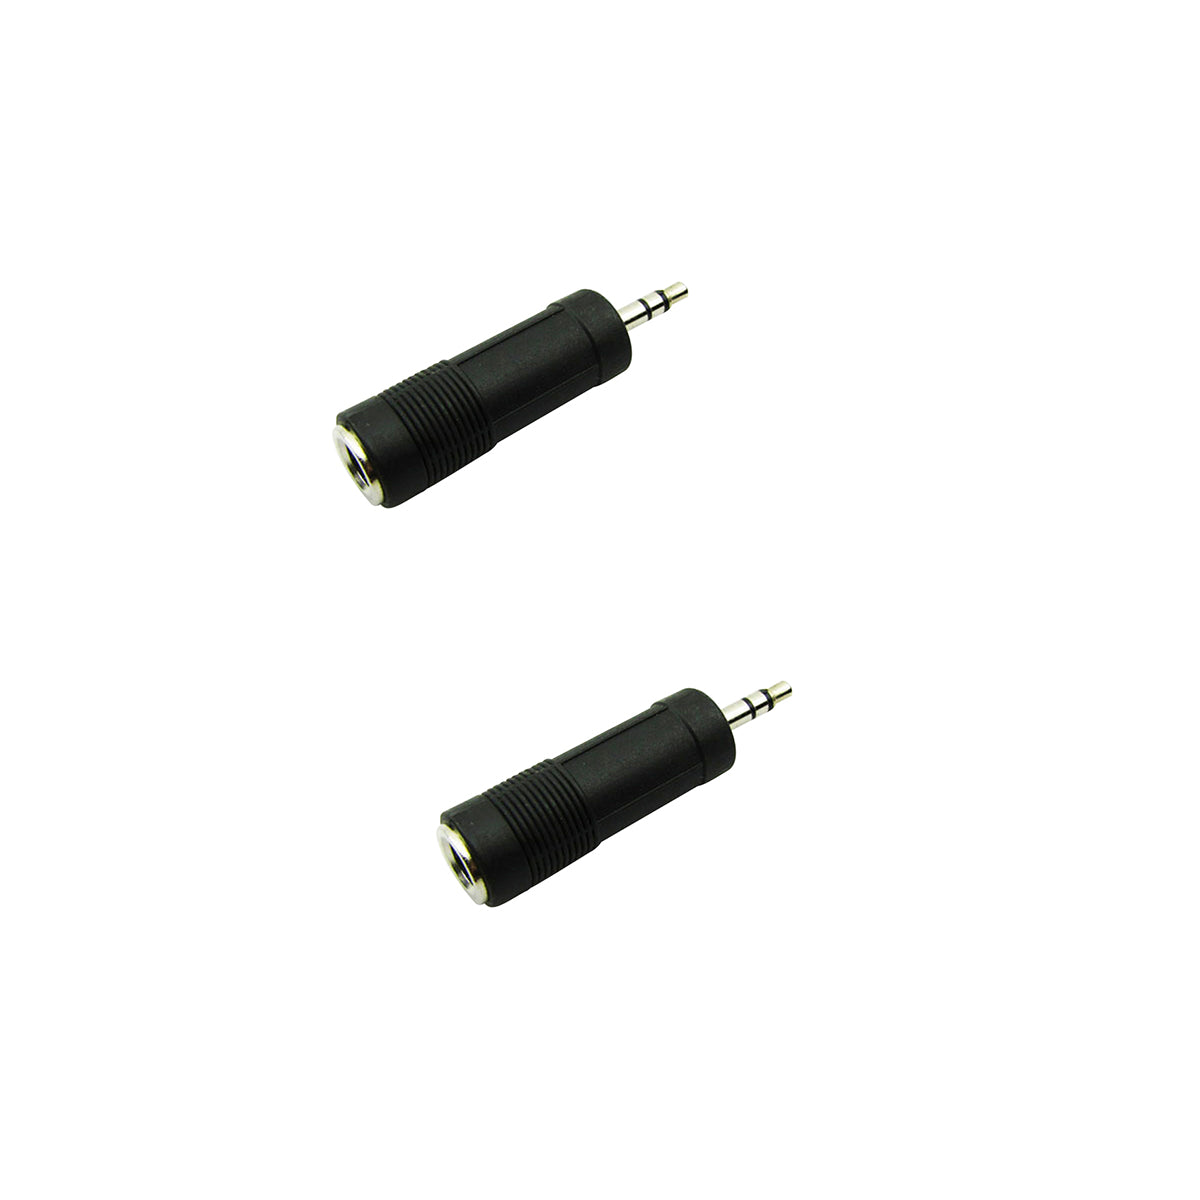 Musiclily Professional 6.35mm Female Plug to 3.5mm Male Jack Audio Stereo adapter Converter, Black( 2 Pieces£©